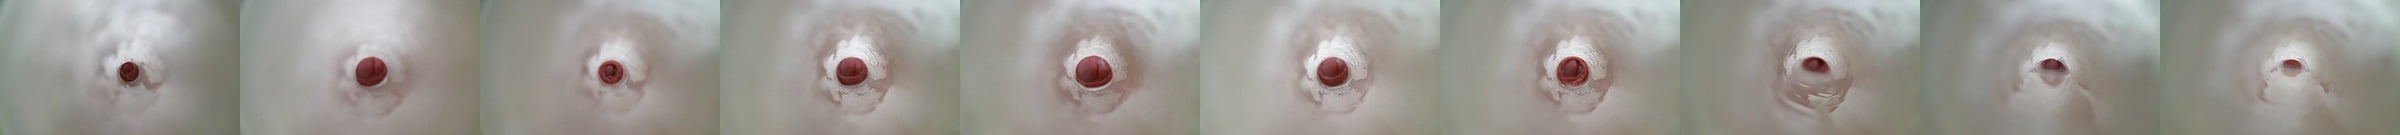 Uncut Cock Cums Loudly Inside Fleshlight Ice Gay Porn 2a Xhamster